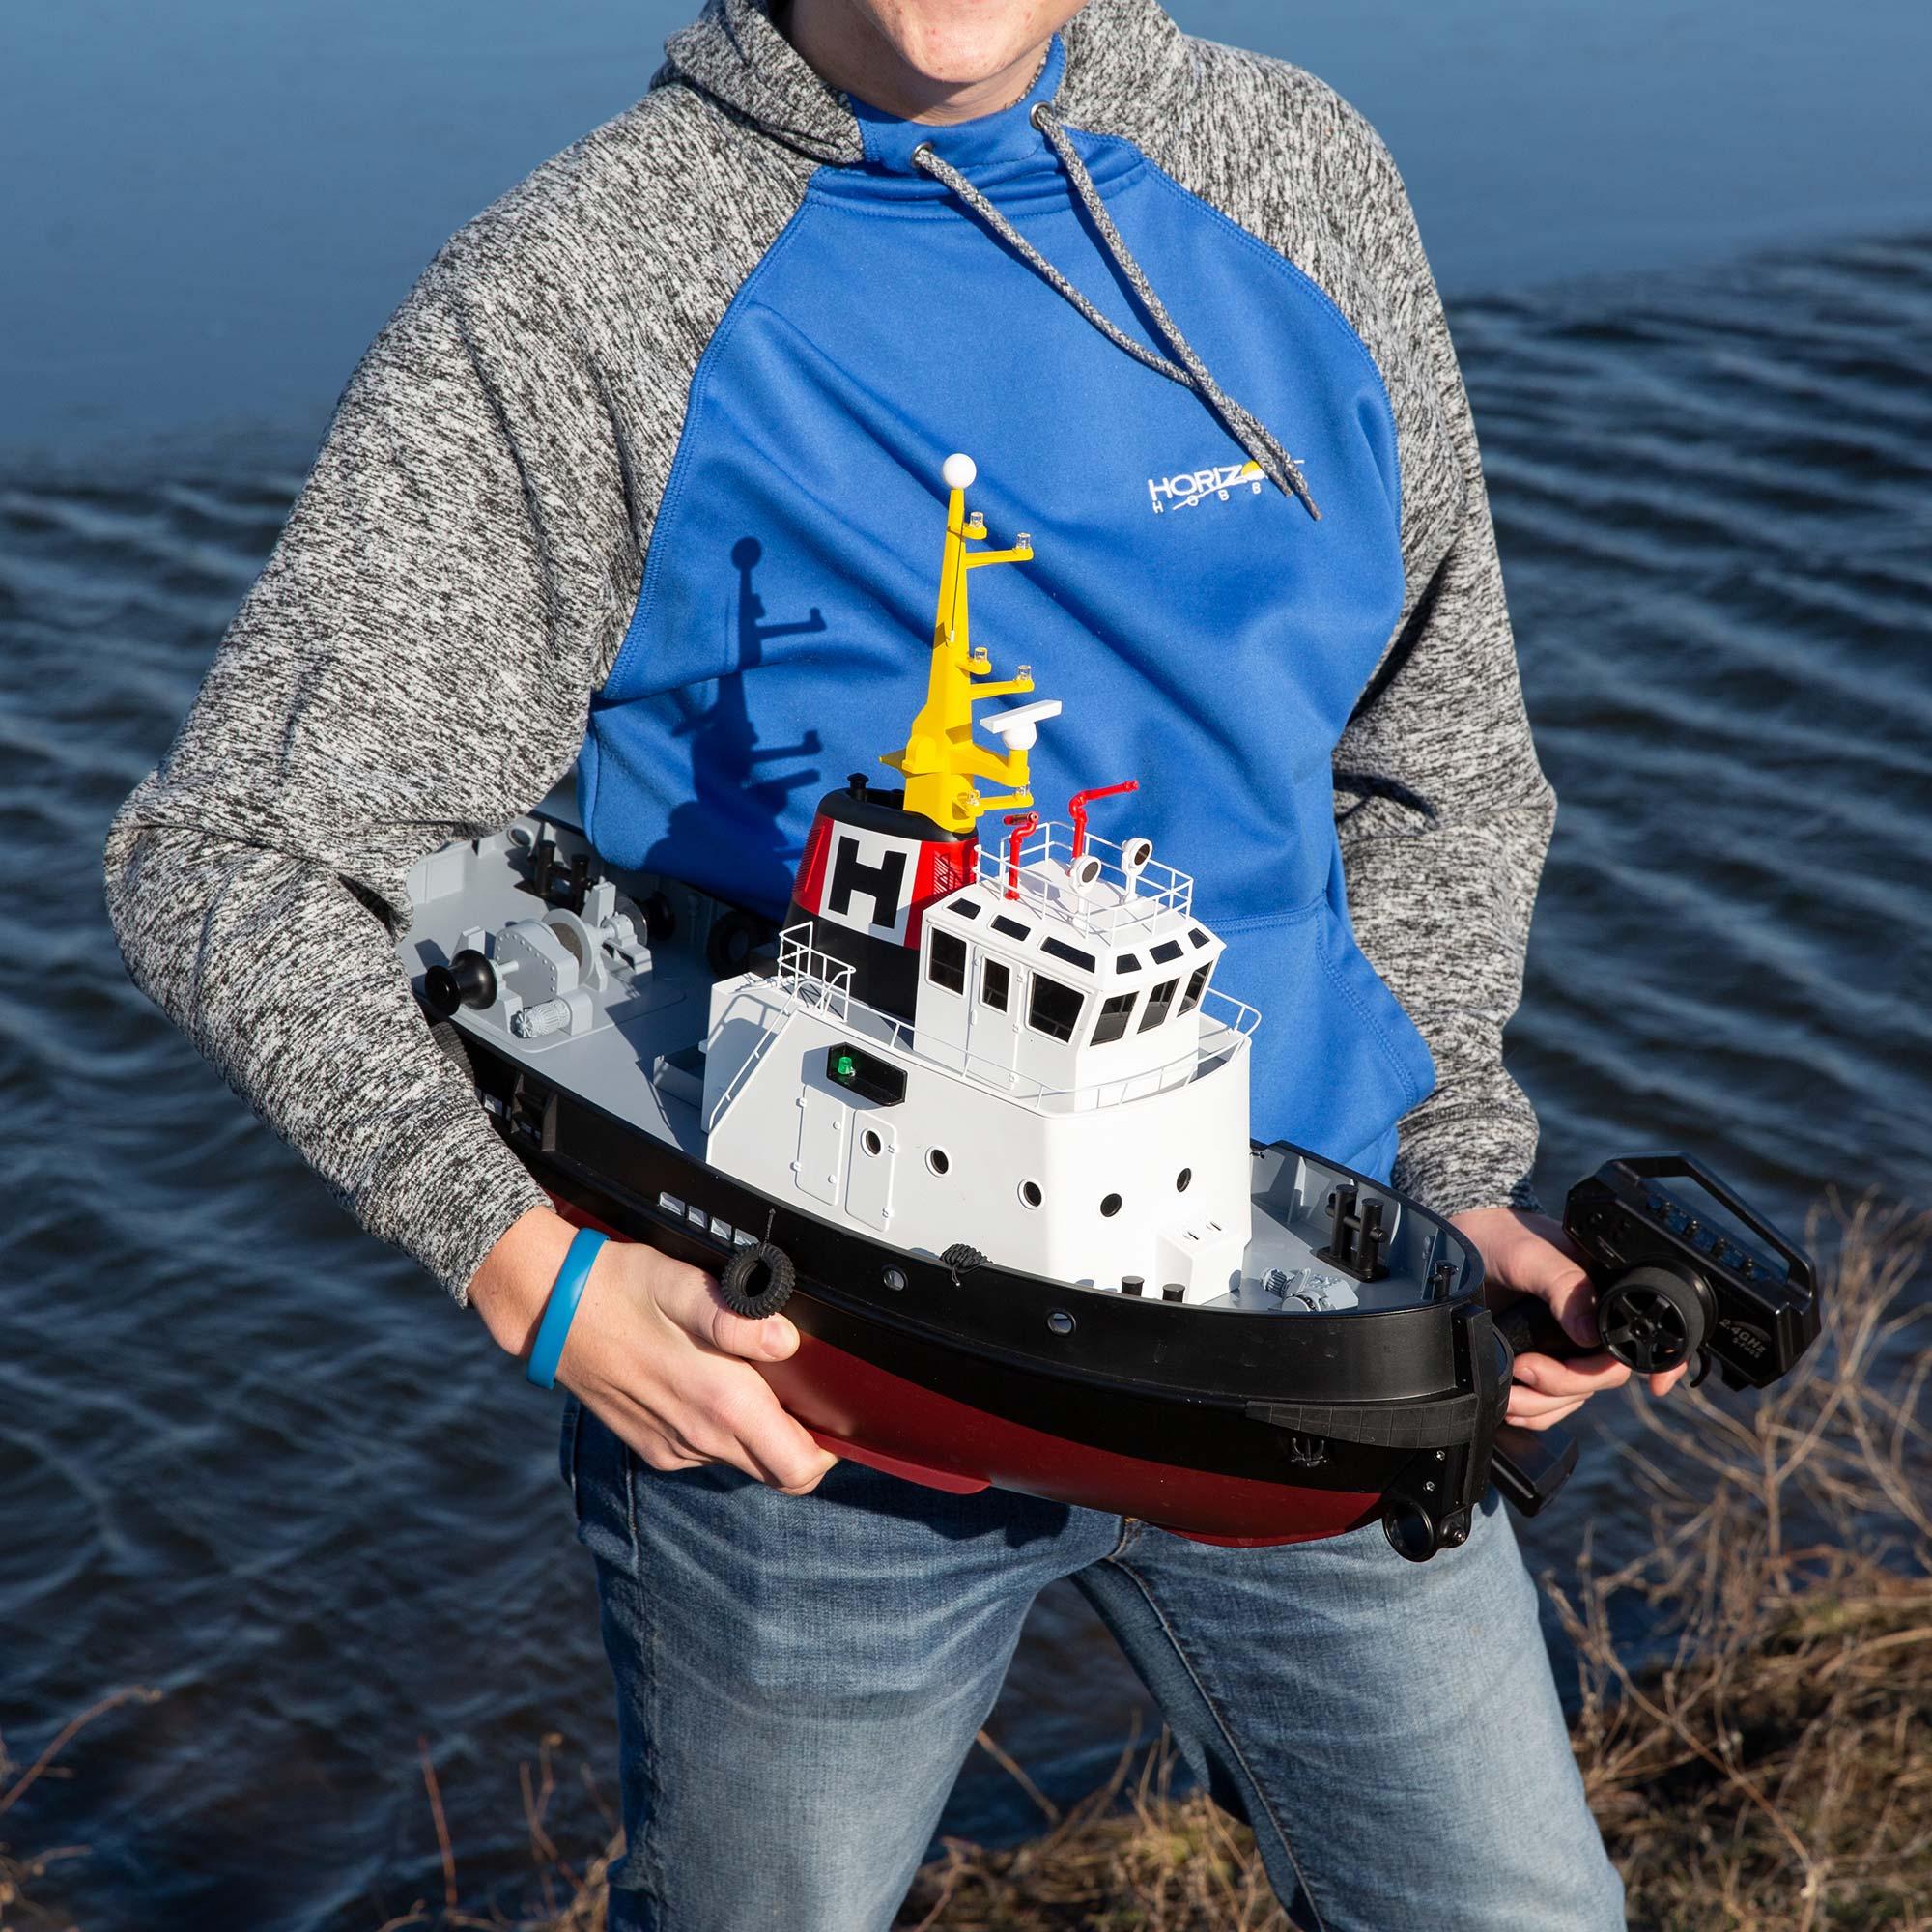 Rc Tug Boats Electric: The Benefits of Electric Power for RC Tug Boats